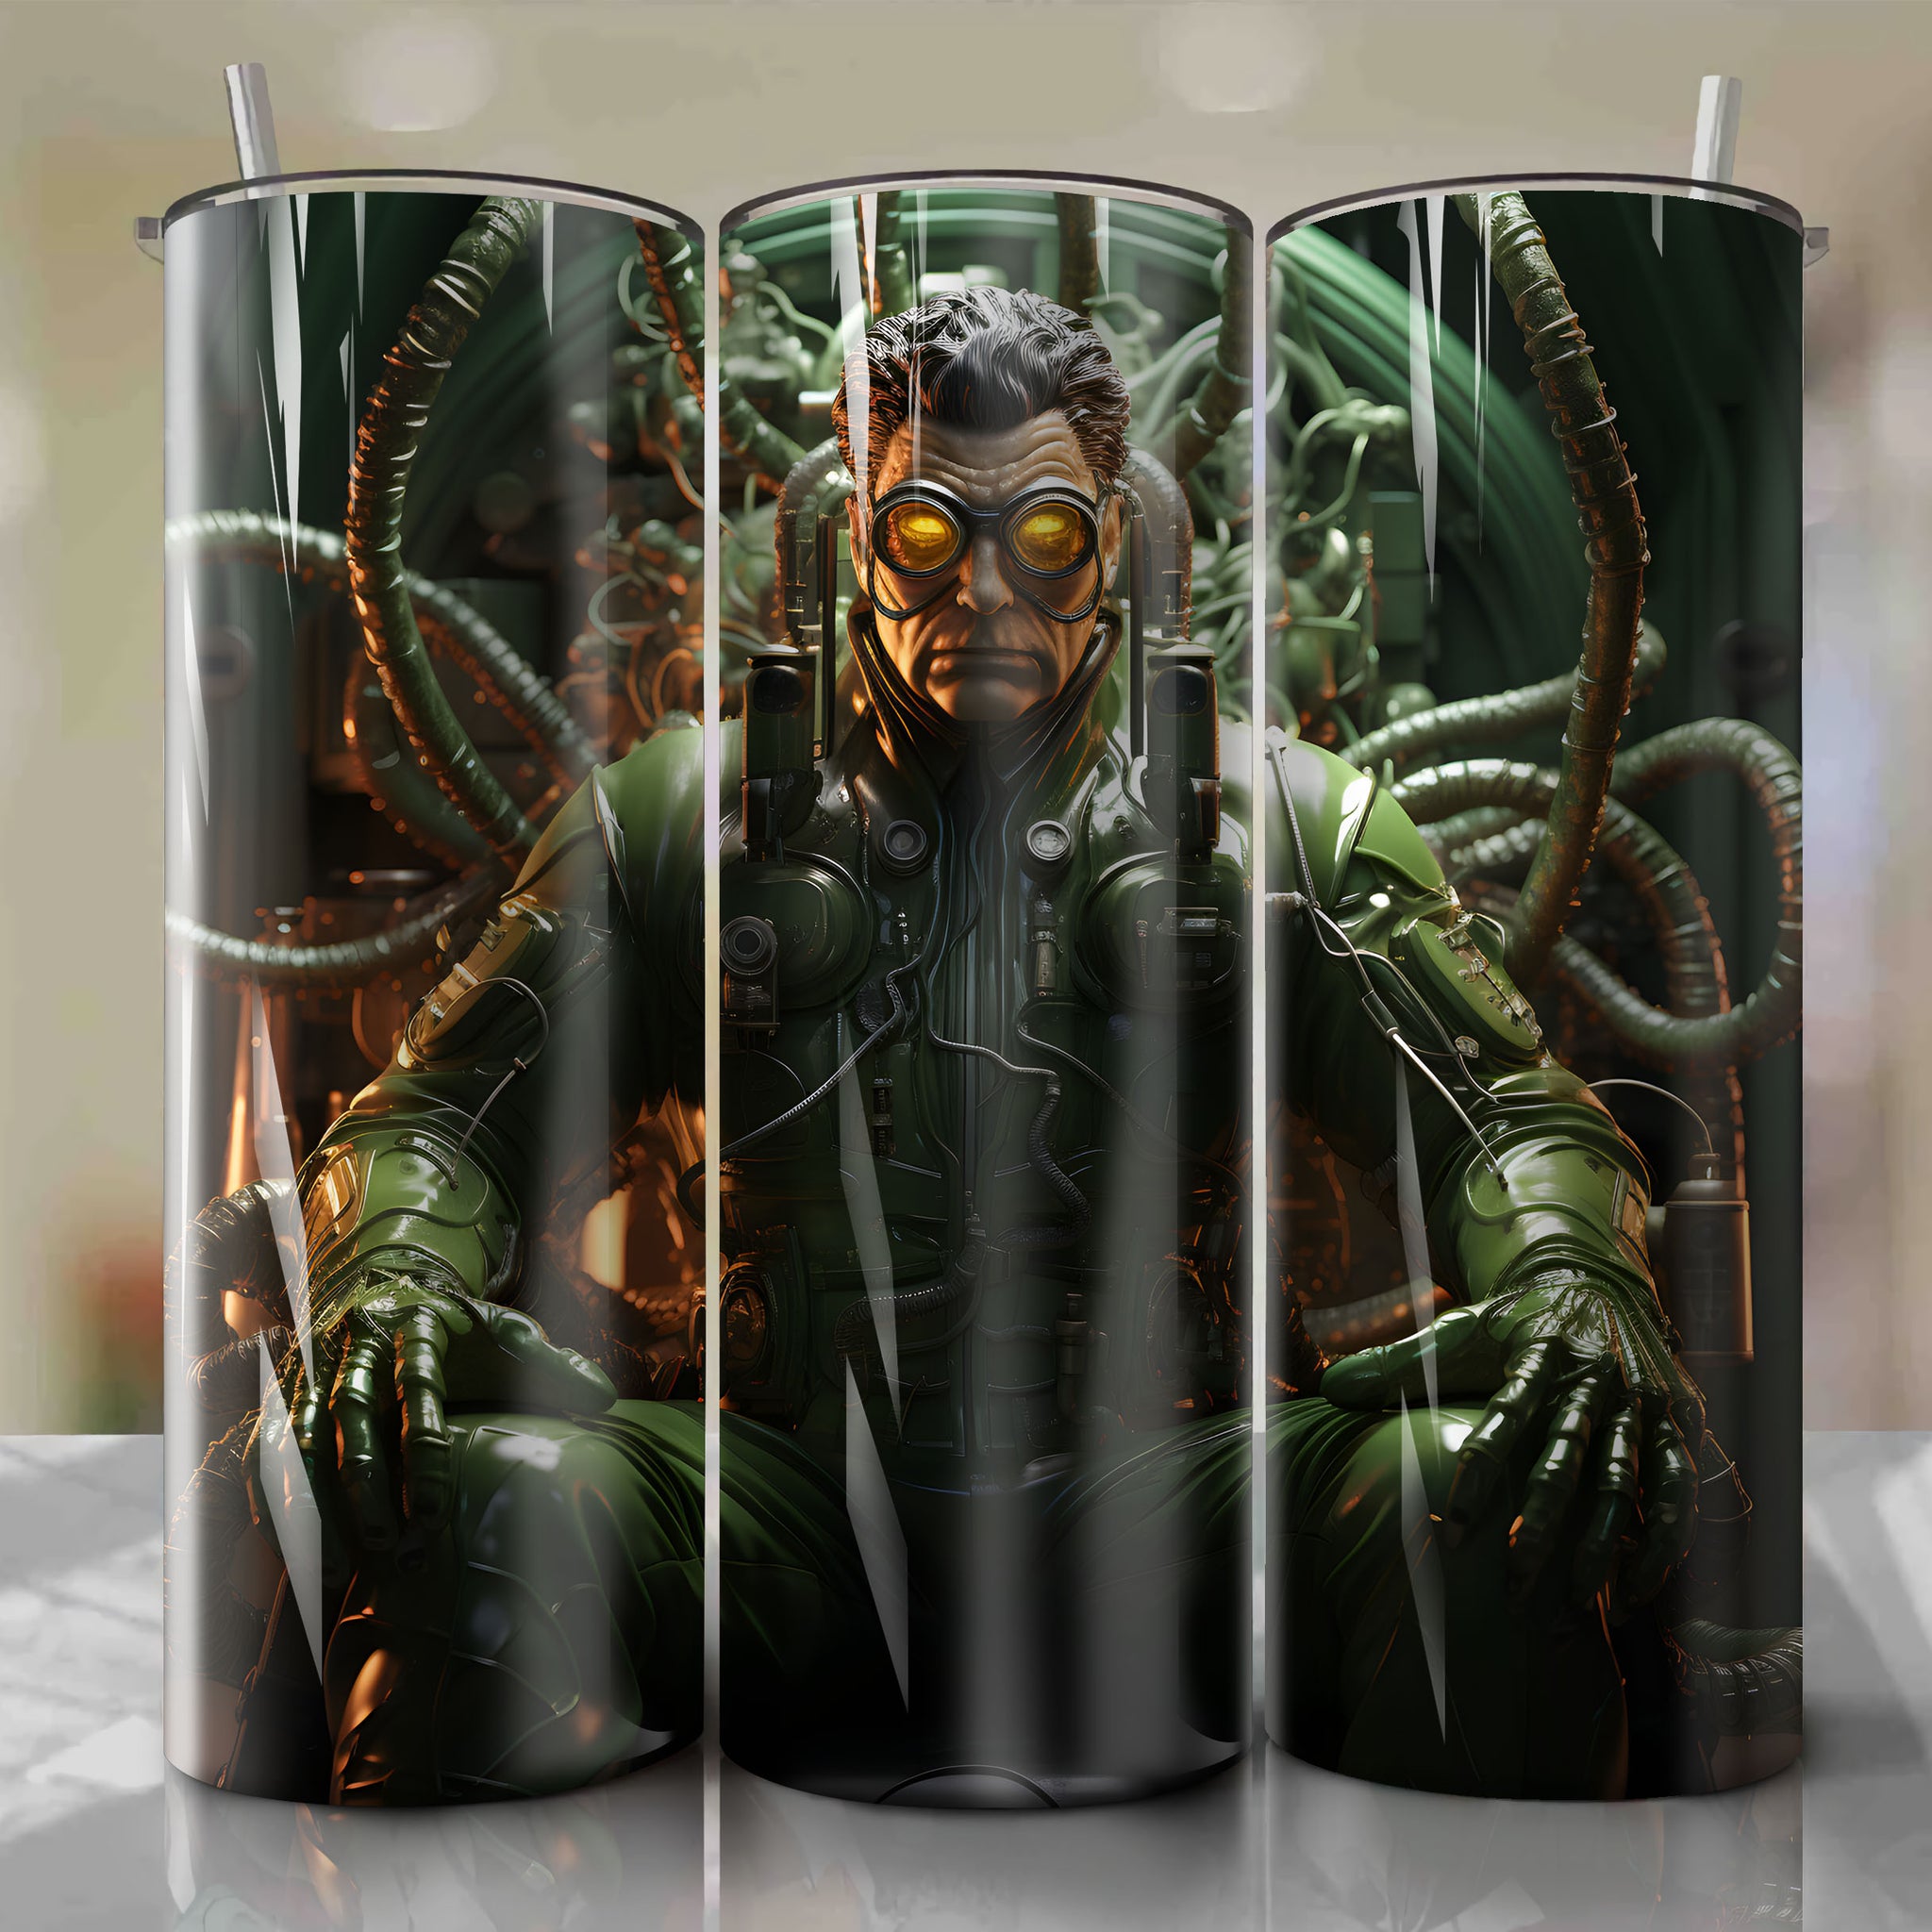 20 Oz Tumbler Wrap - A Stunning Sculpture Depicting the Genius and Madness of Doctor Octopus
